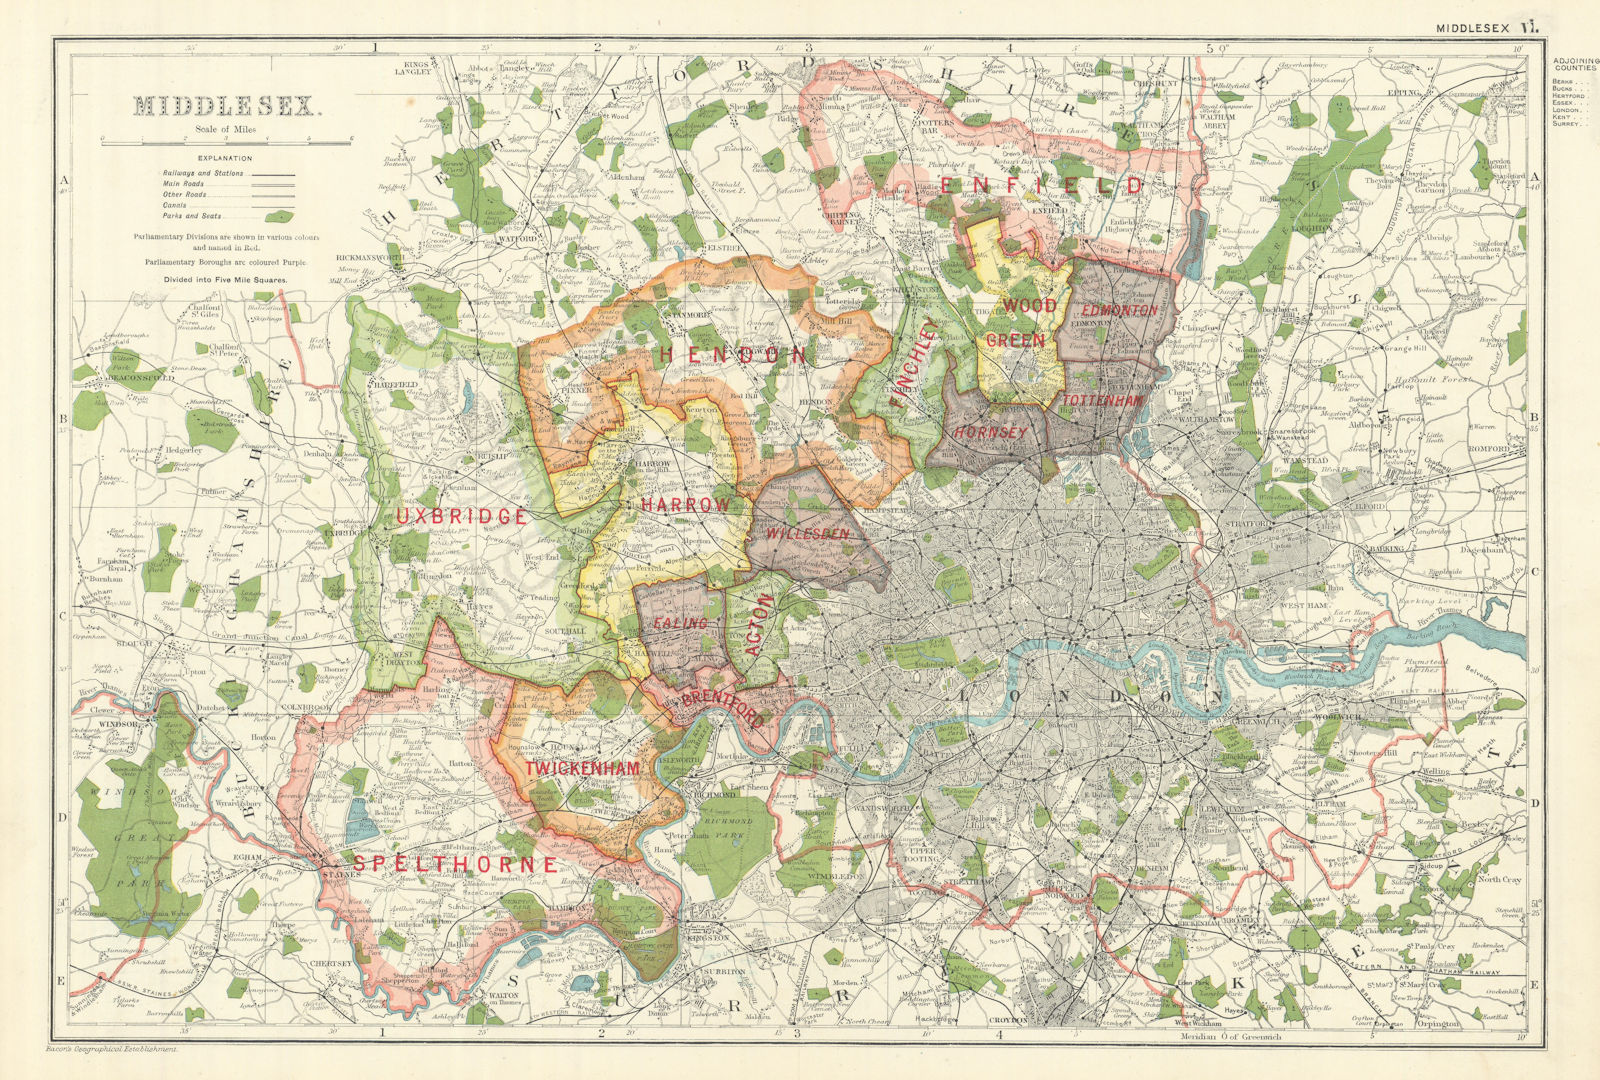 MIDDLESEX showing Parliamentary divisions,boroughs & parks.London.BACON 1919 map